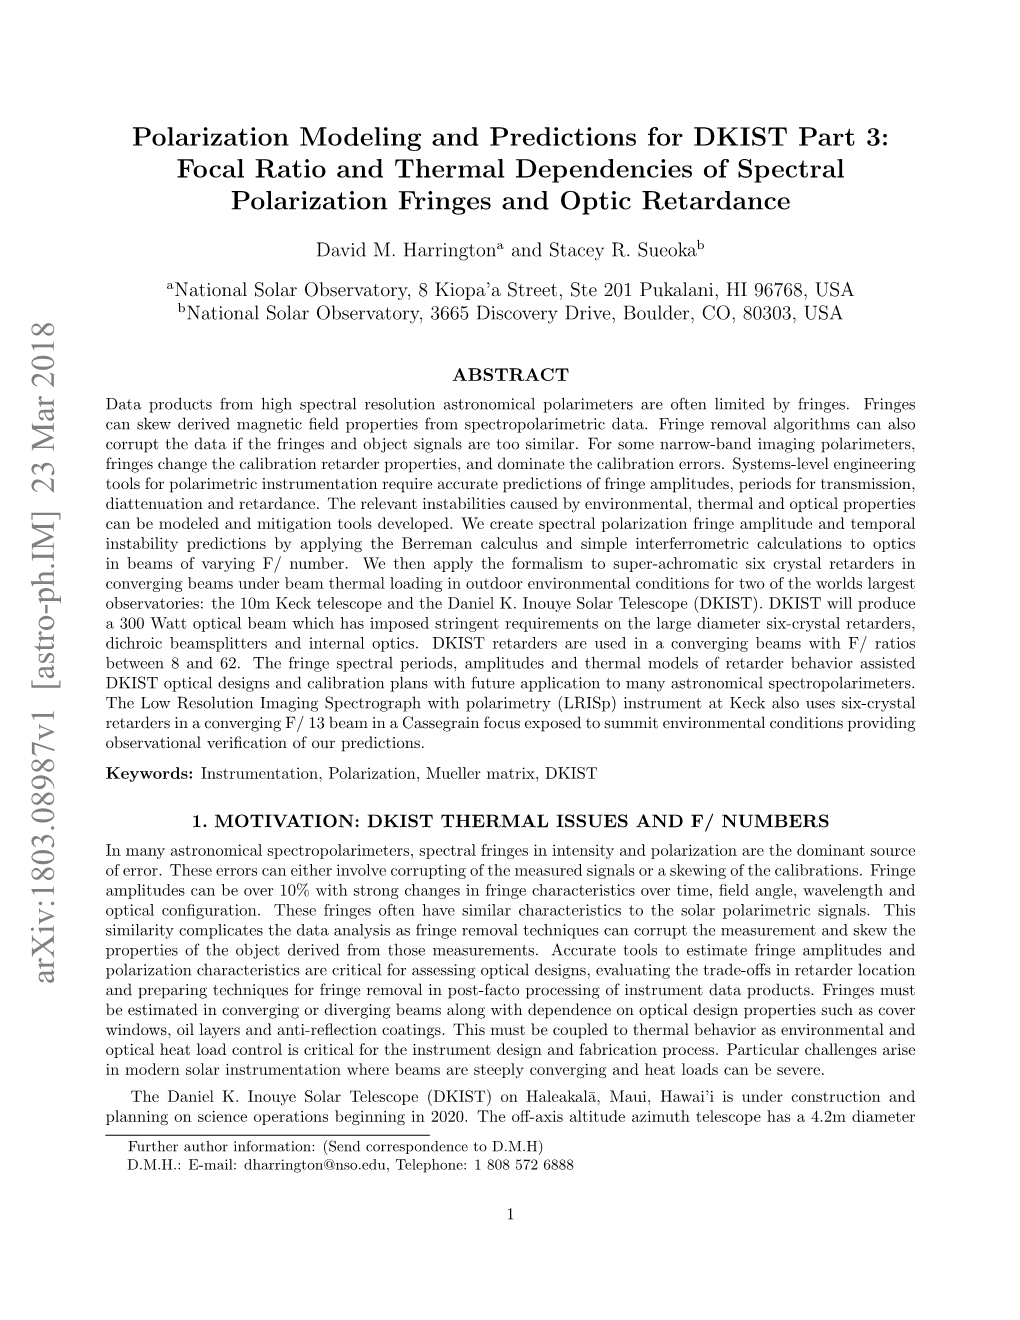 Polarization Modeling and Predictions for DKIST Part 3: Focal Ratio and Thermal Dependencies of Spectral Polarization Fringes and Optic Retardance